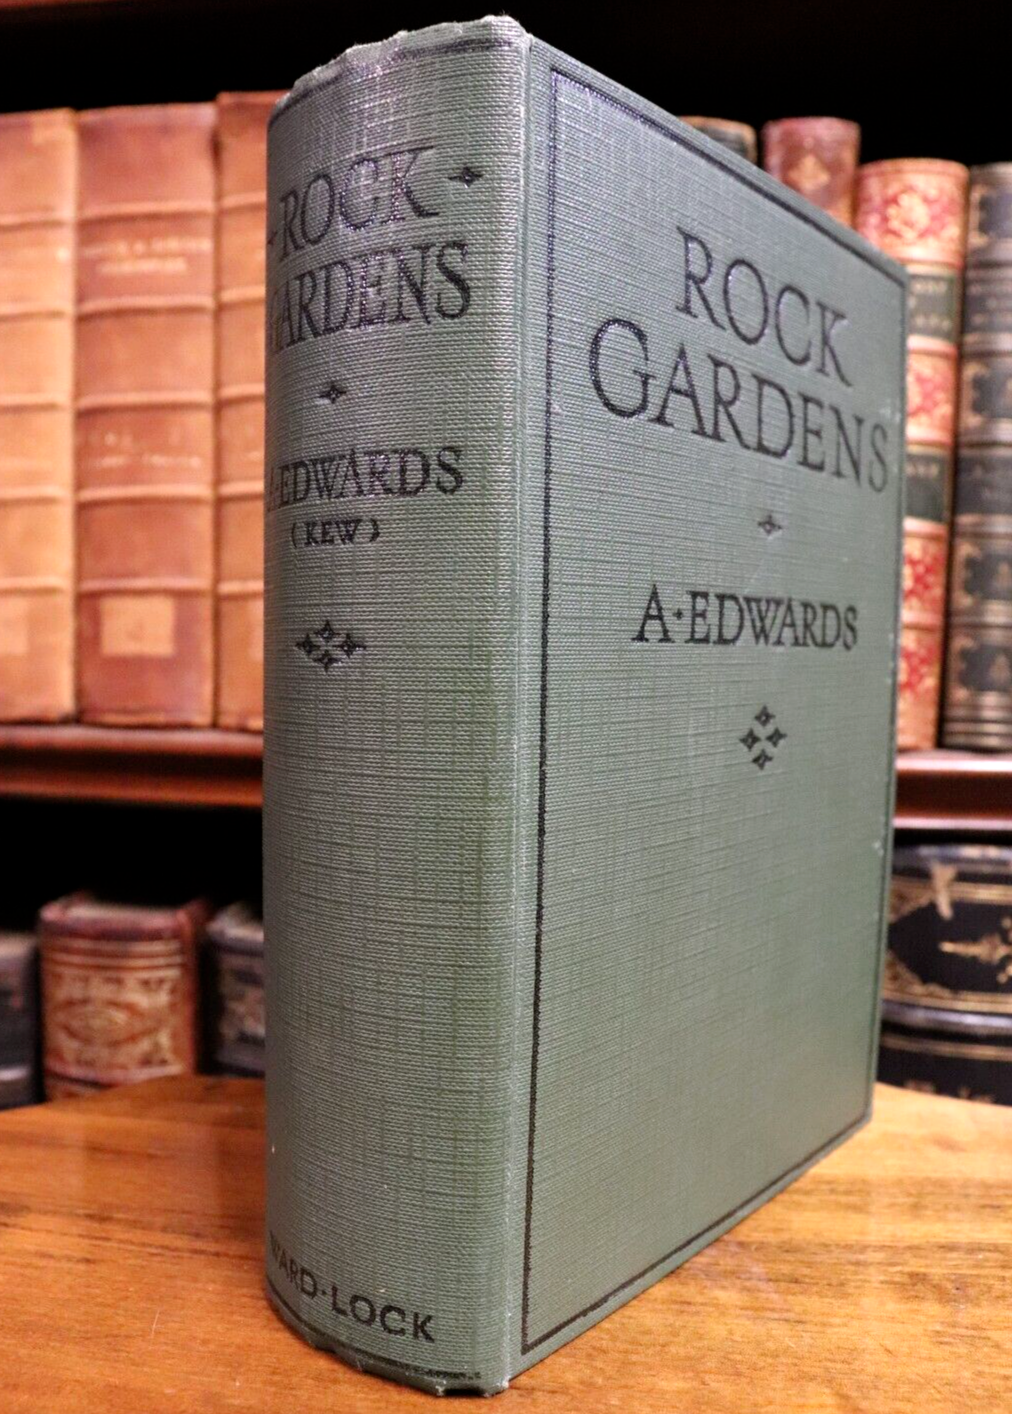 1937 Rock Gardens by A. Edwards Antique Gardening Reference Book